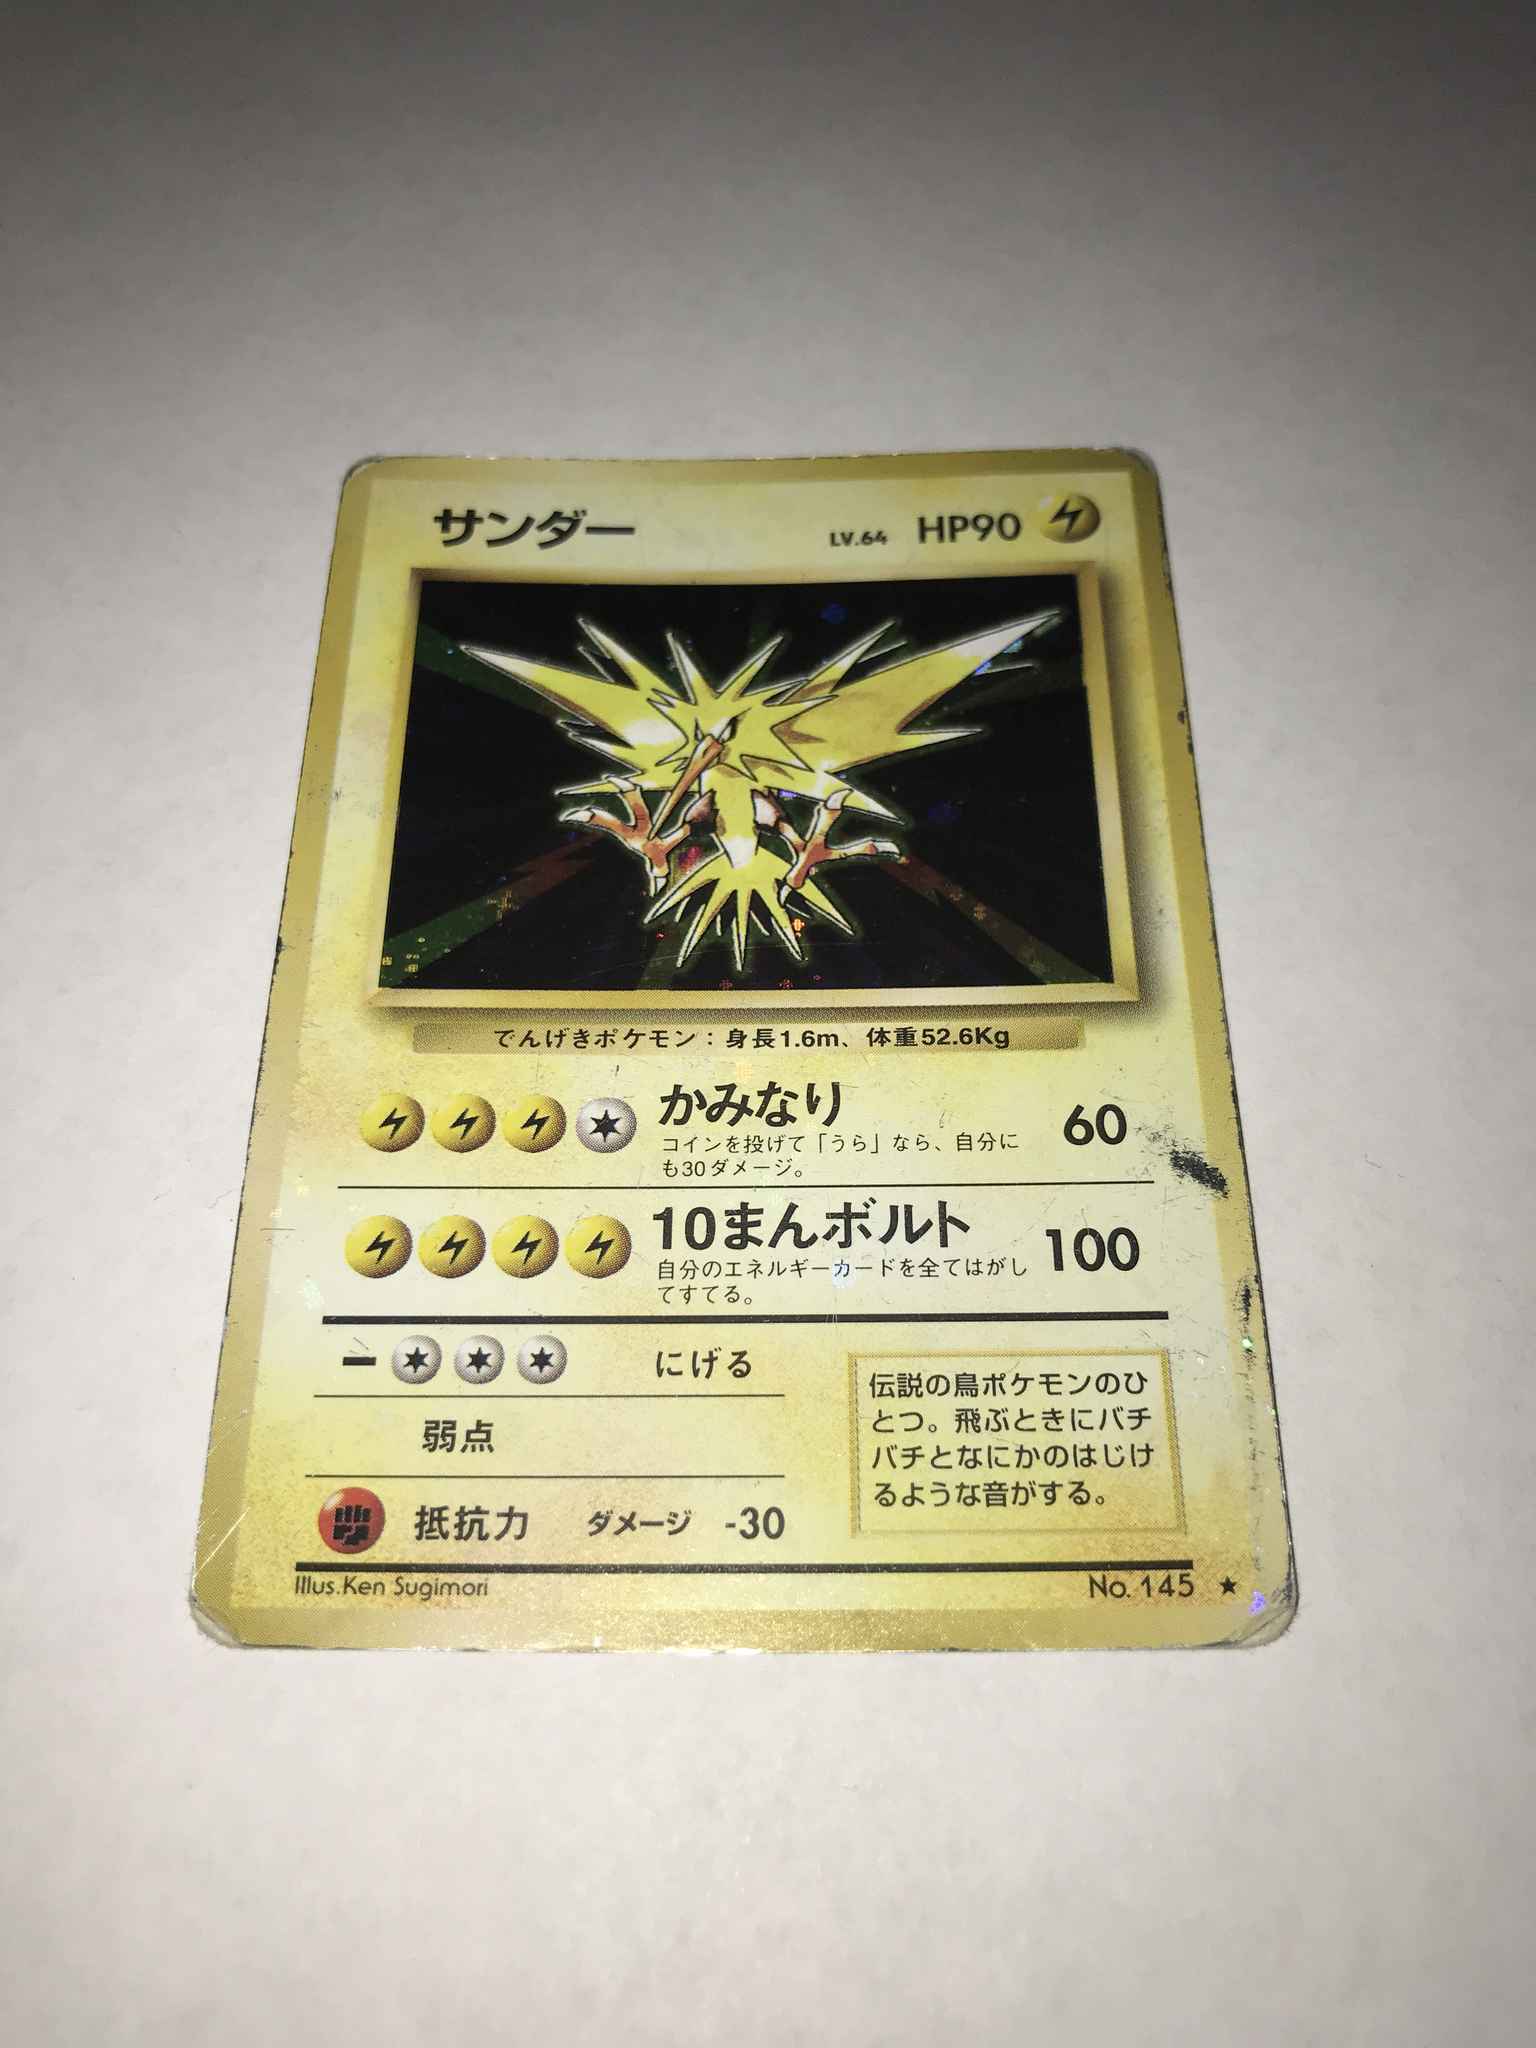 Japanese Zapdos Zapdos Xy Evolutions Pokemon Online Gaming Store For Cards Miniatures Singles Packs Booster Boxes